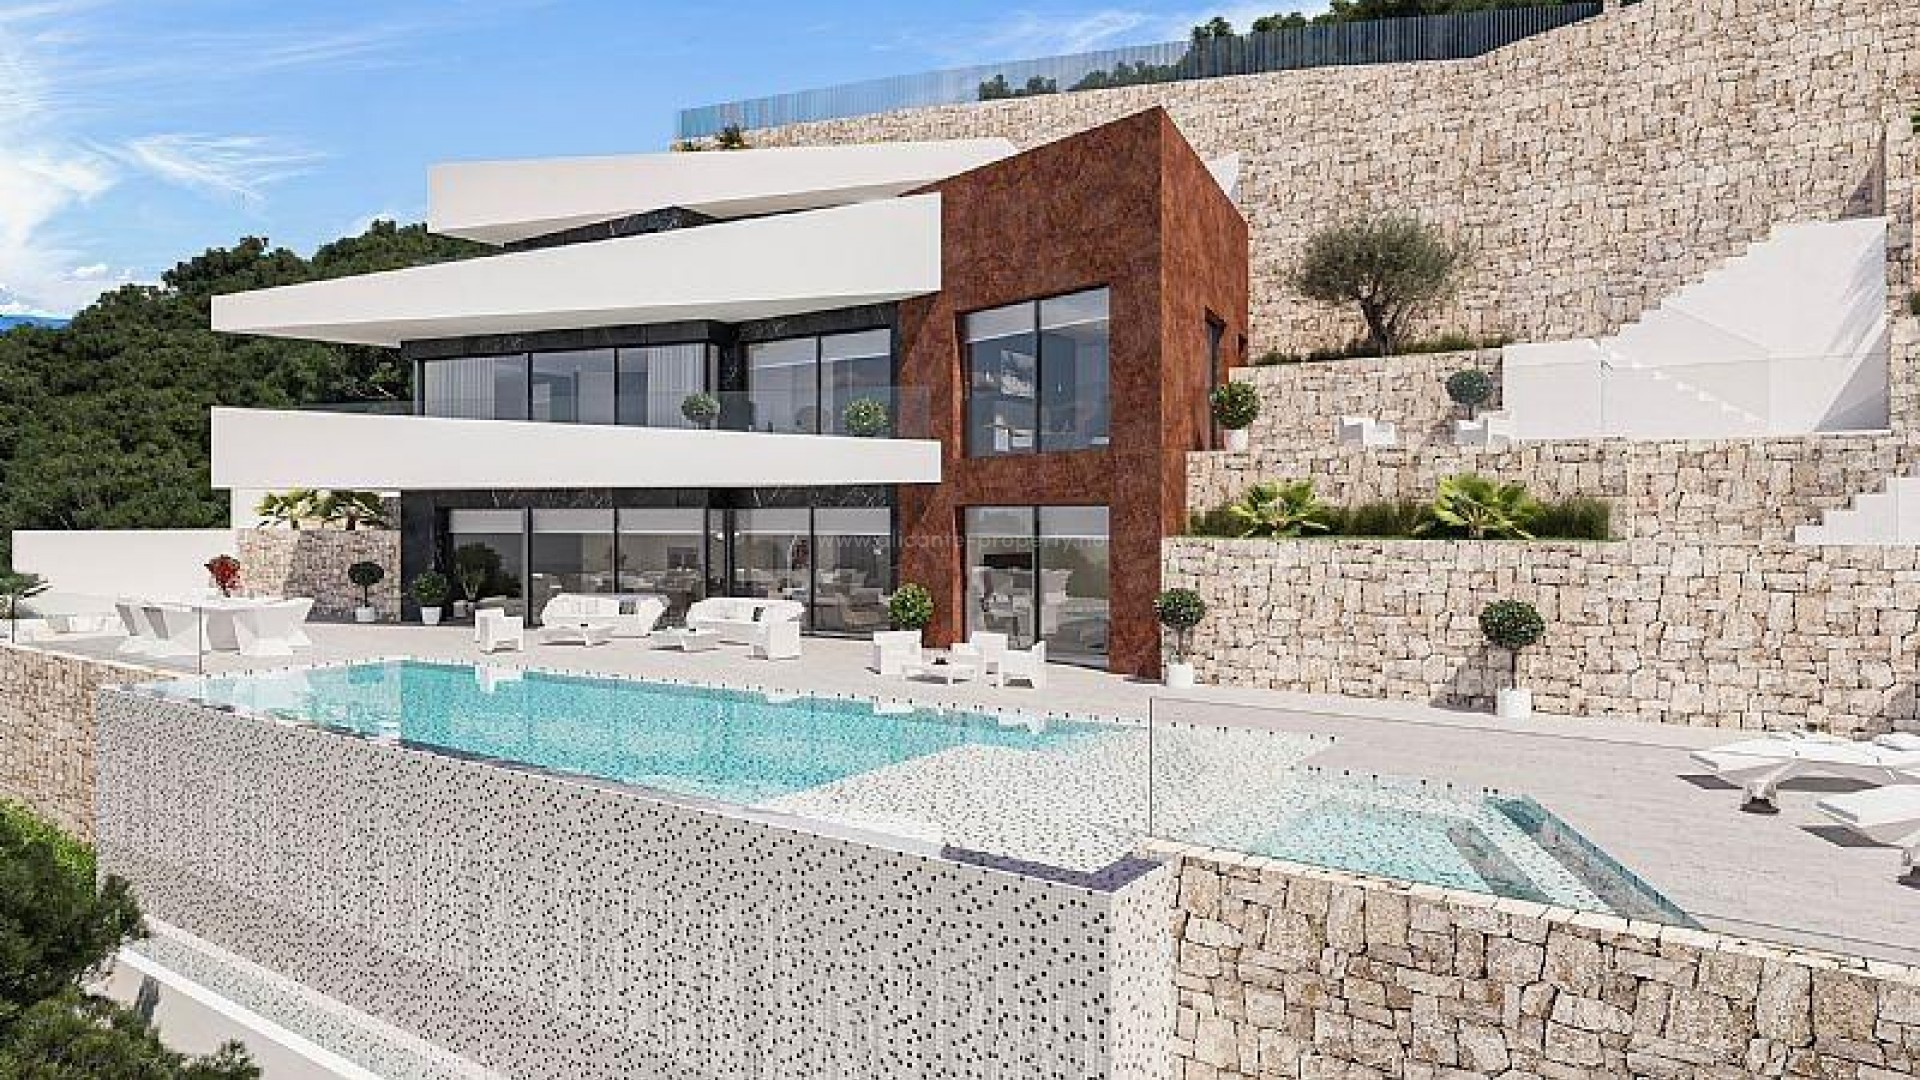 Luxury villa in Benissa, 4 bedrooms, 4 bathrooms, infinity pool, sea view, terraces, garage for 2 cars and lift, air conditioning, lift, barbecue, veranda, hot tub